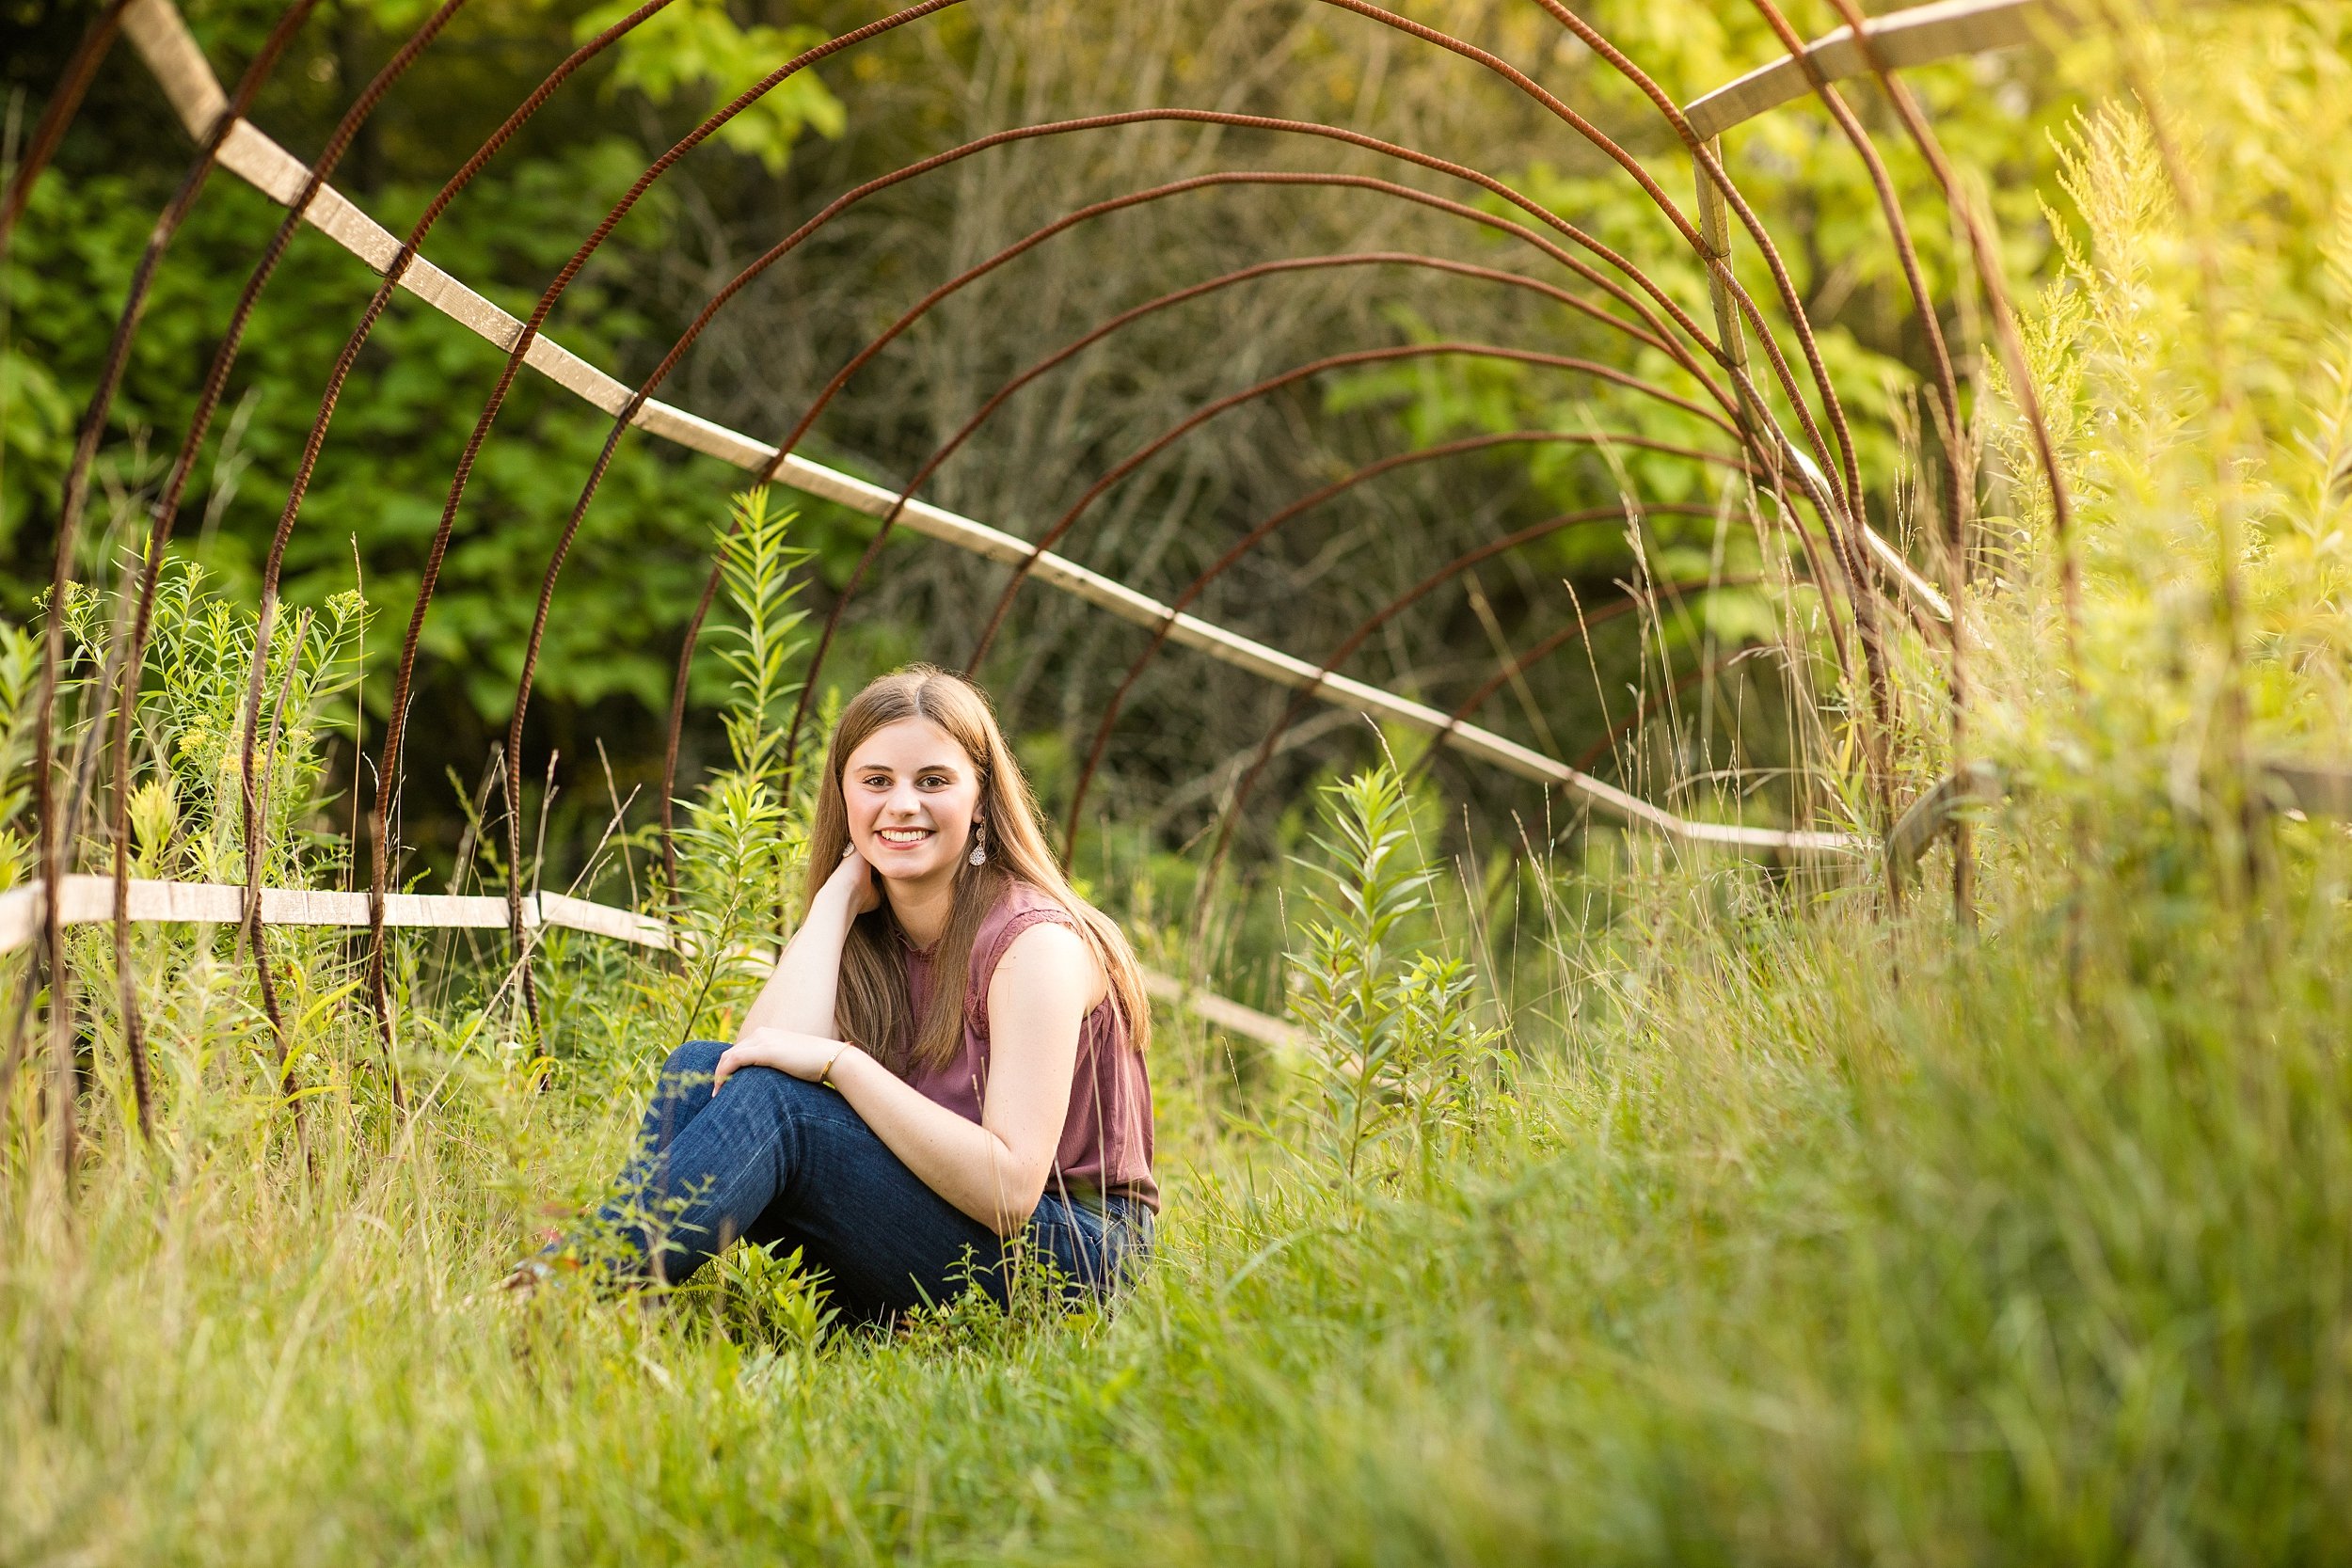 butler county senior photo locations, senior picture location ideas butler county, cranberry township senior photos, zelienople senior photos, mars senior photos, succop nature park senior photos